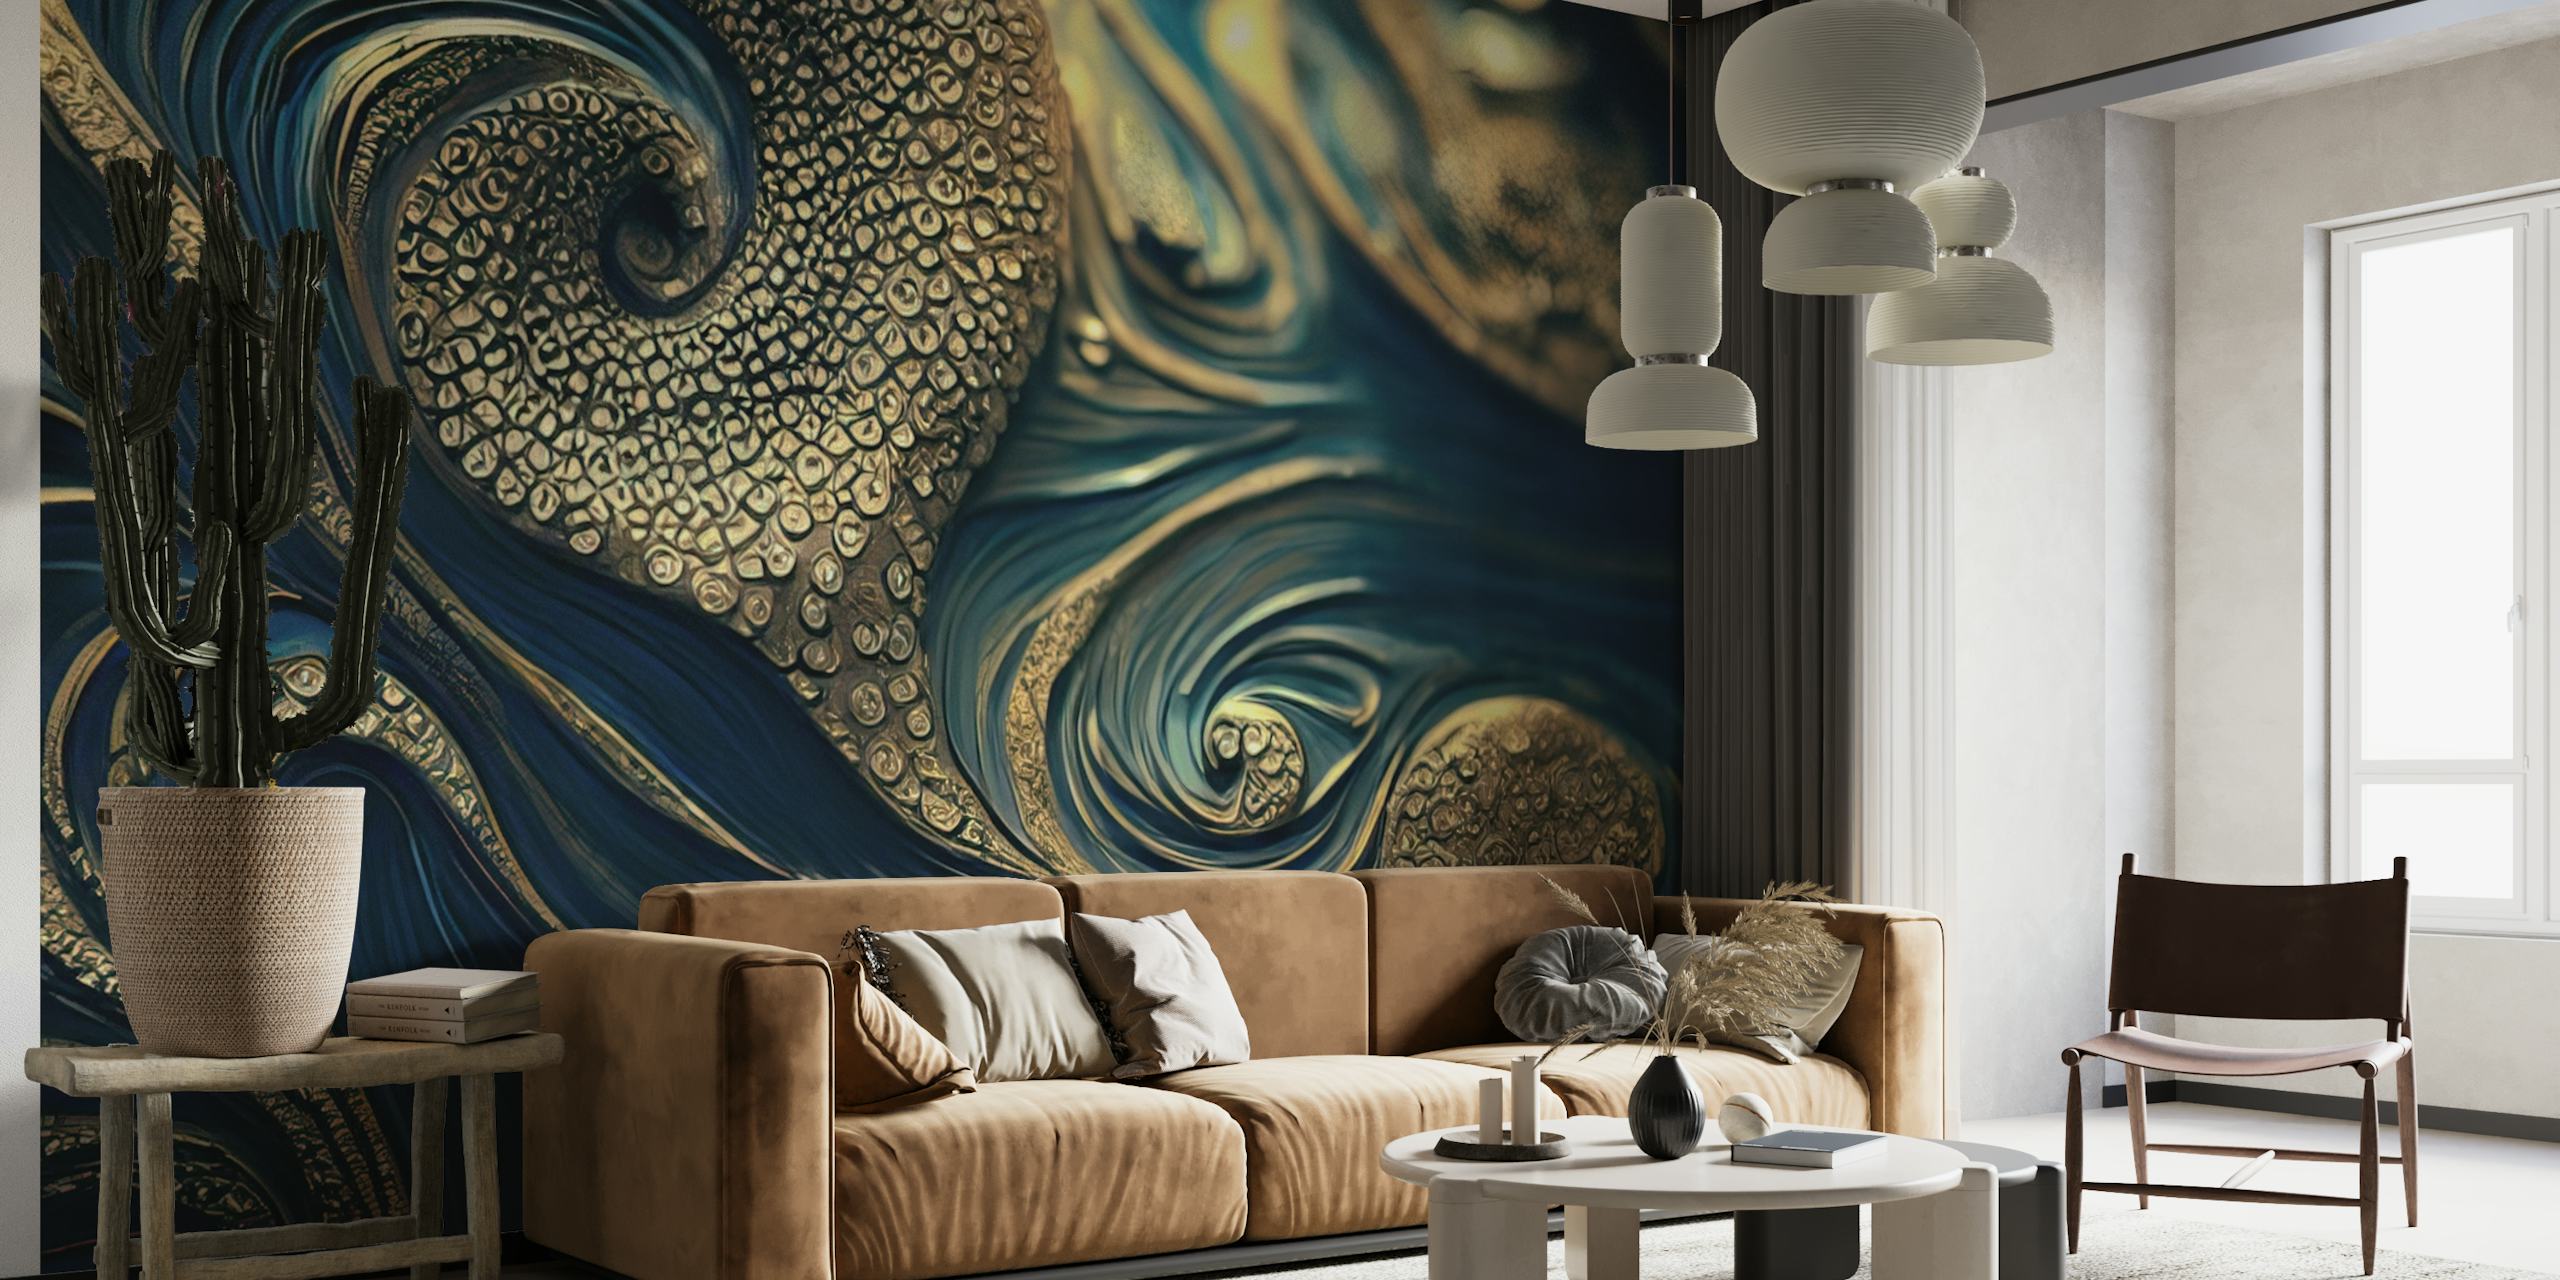 Octopus abstract wall mural with swirling blue patterns and golden accents